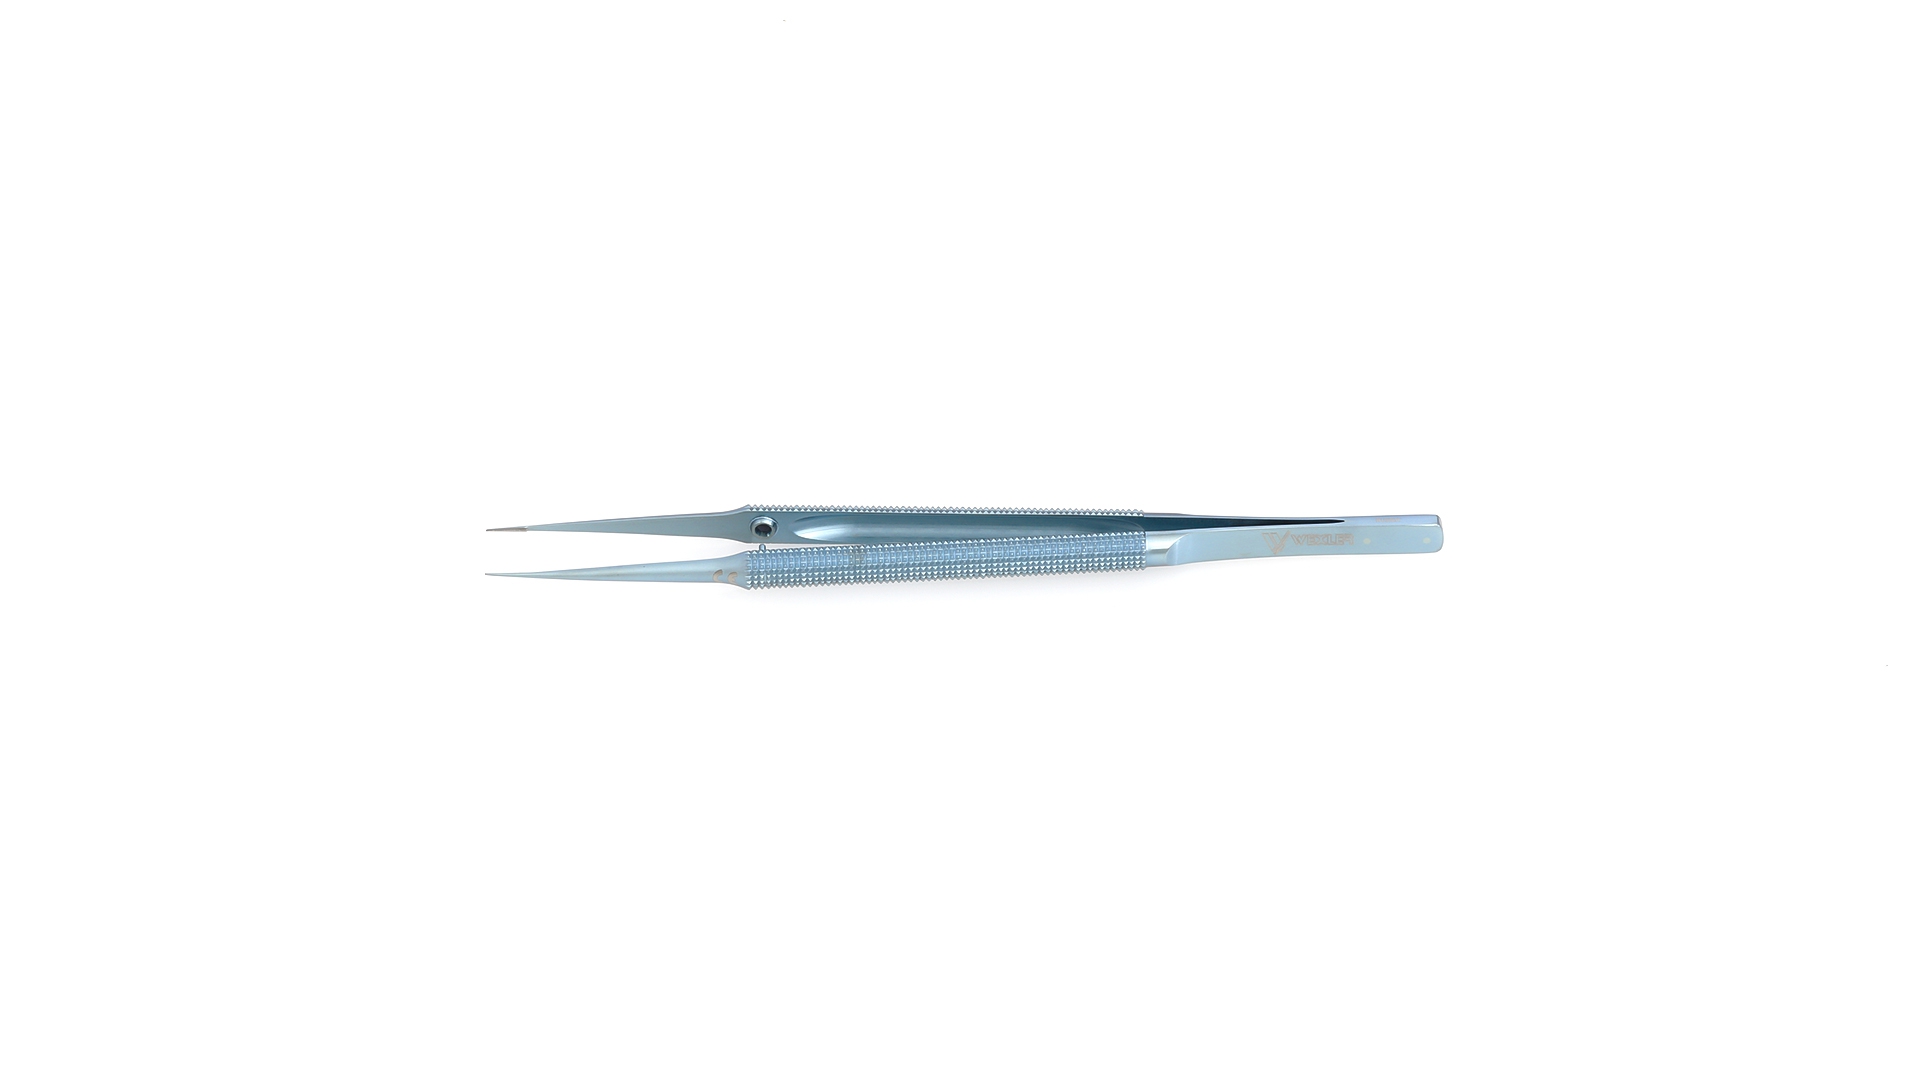 Micro Forceps - Straight 0.4mm TC Coated concave/convex tips